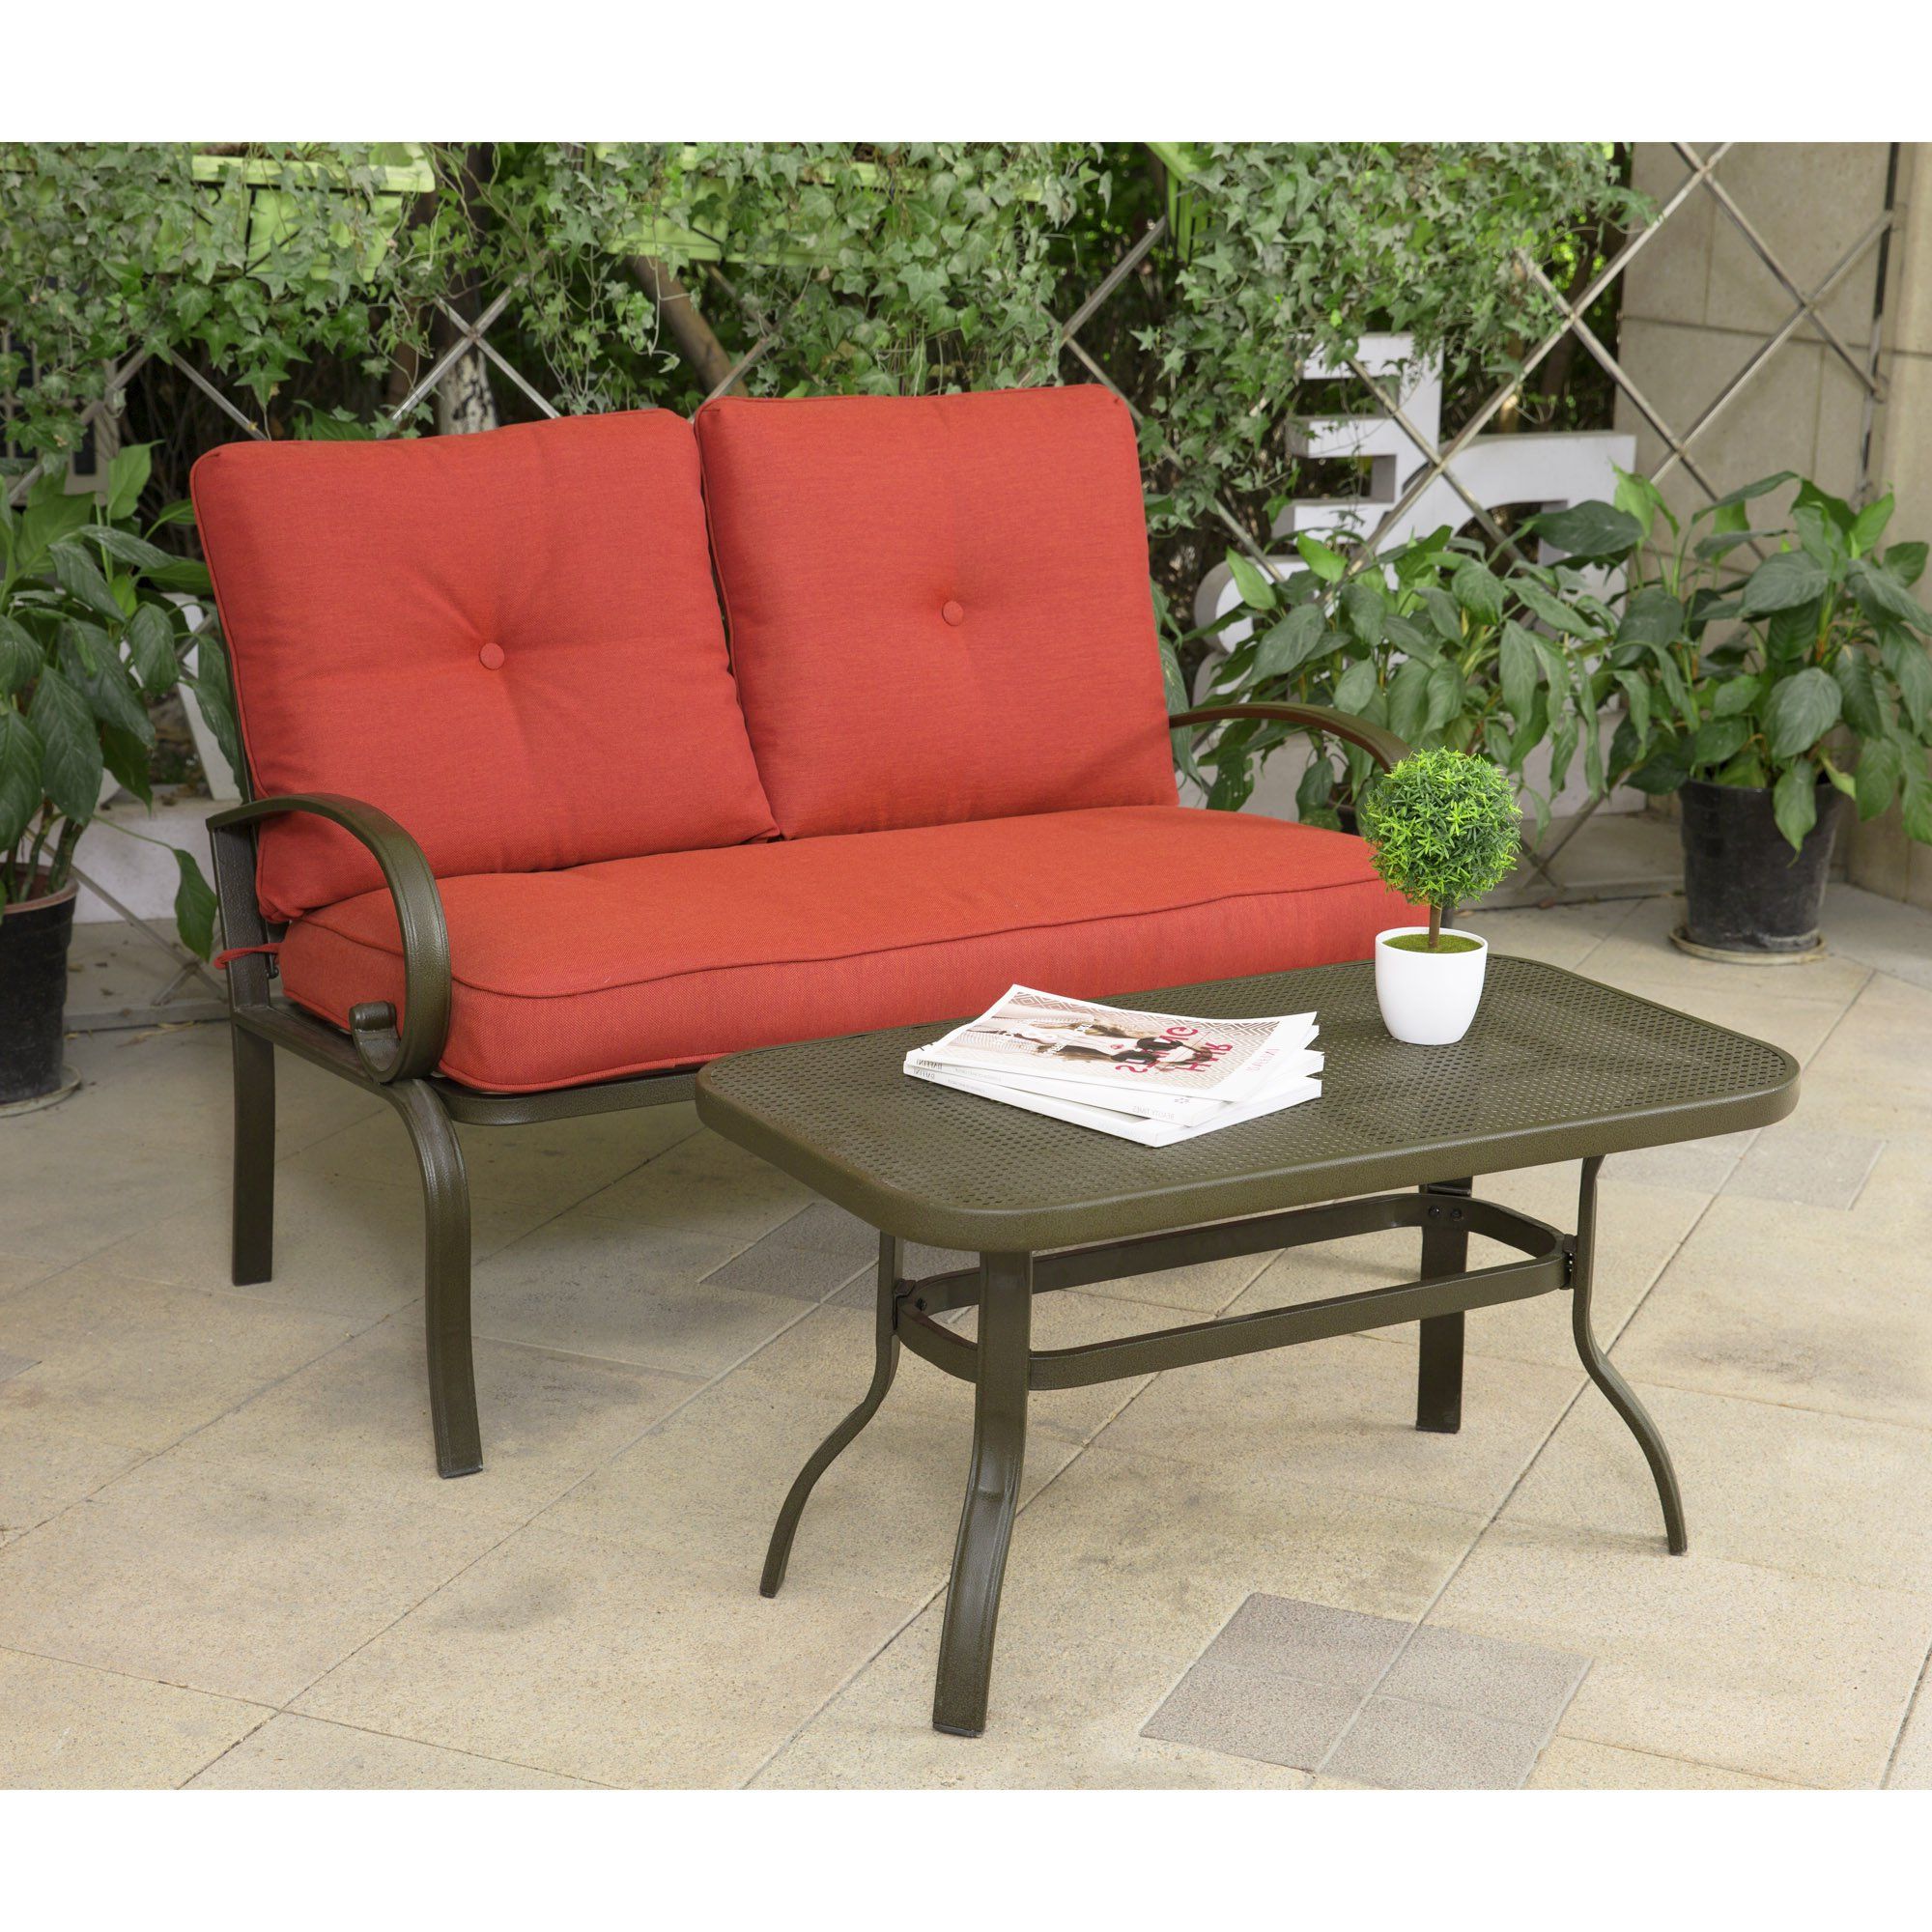 Red Loveseat Outdoor Conversation Sets In Popular Cheap Patio Loveseat Set, Find Patio Loveseat Set Deals On Line At (View 14 of 15)